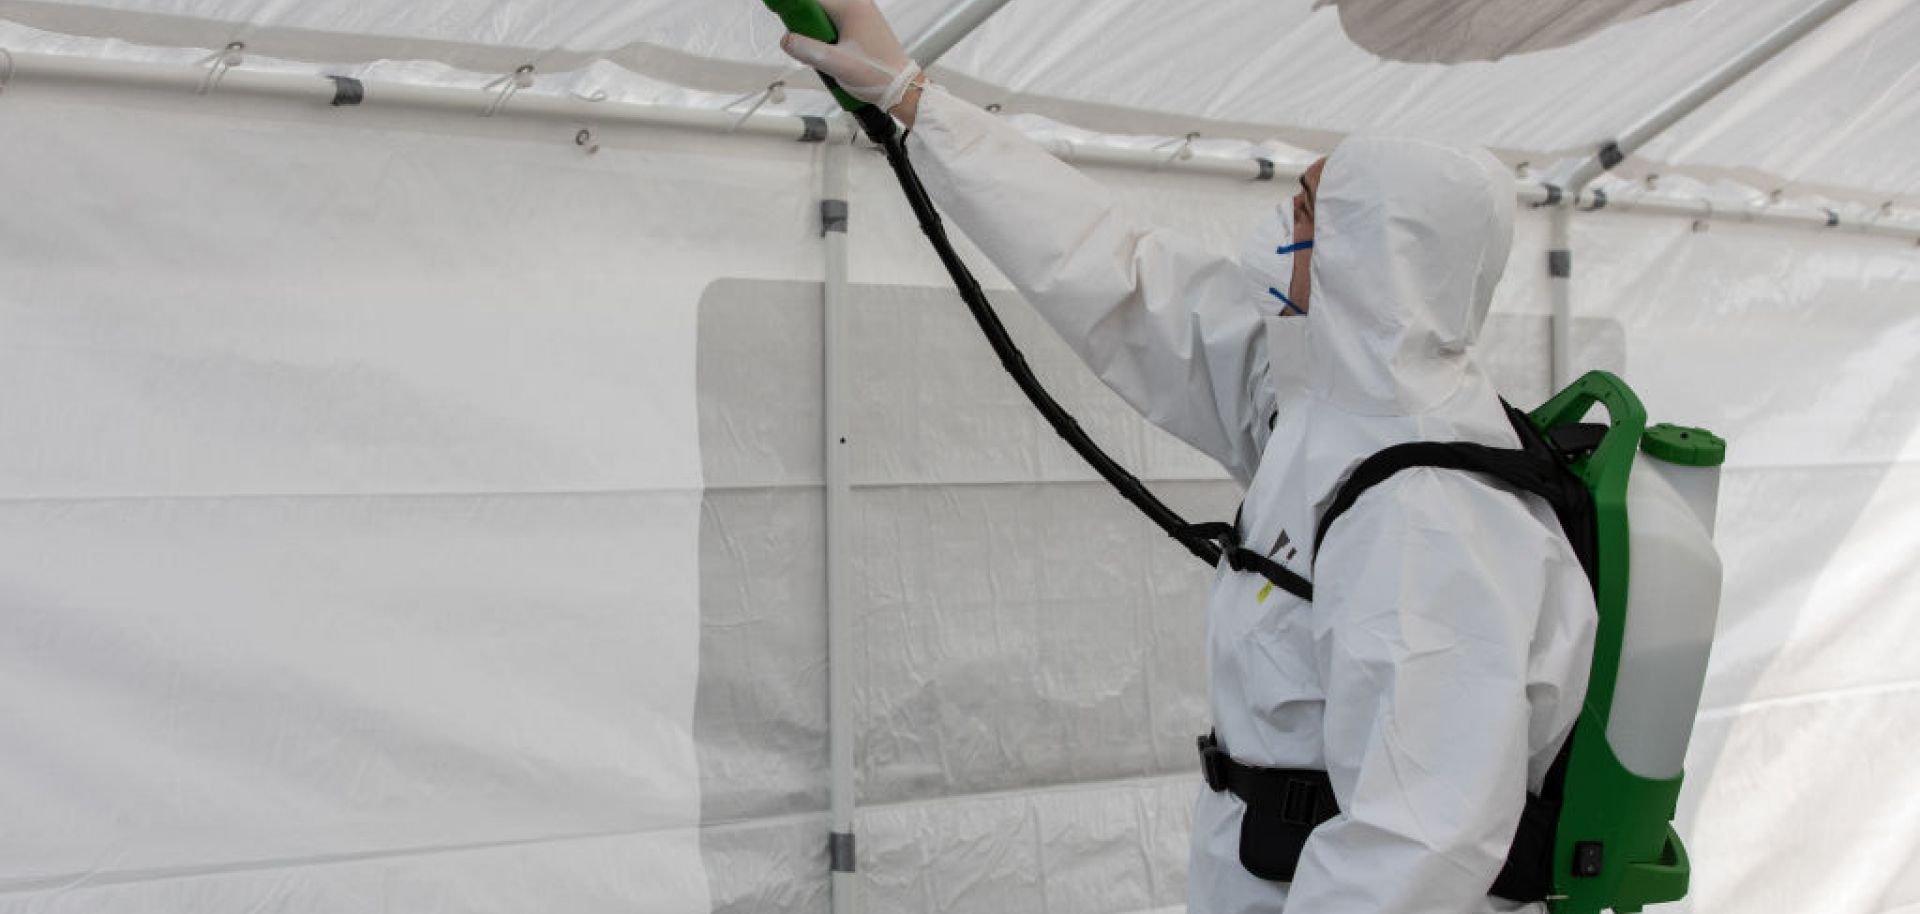 A worker disinfects a field hospital for COVID-19 patients March 20, 2020, in Cremona, Italy.